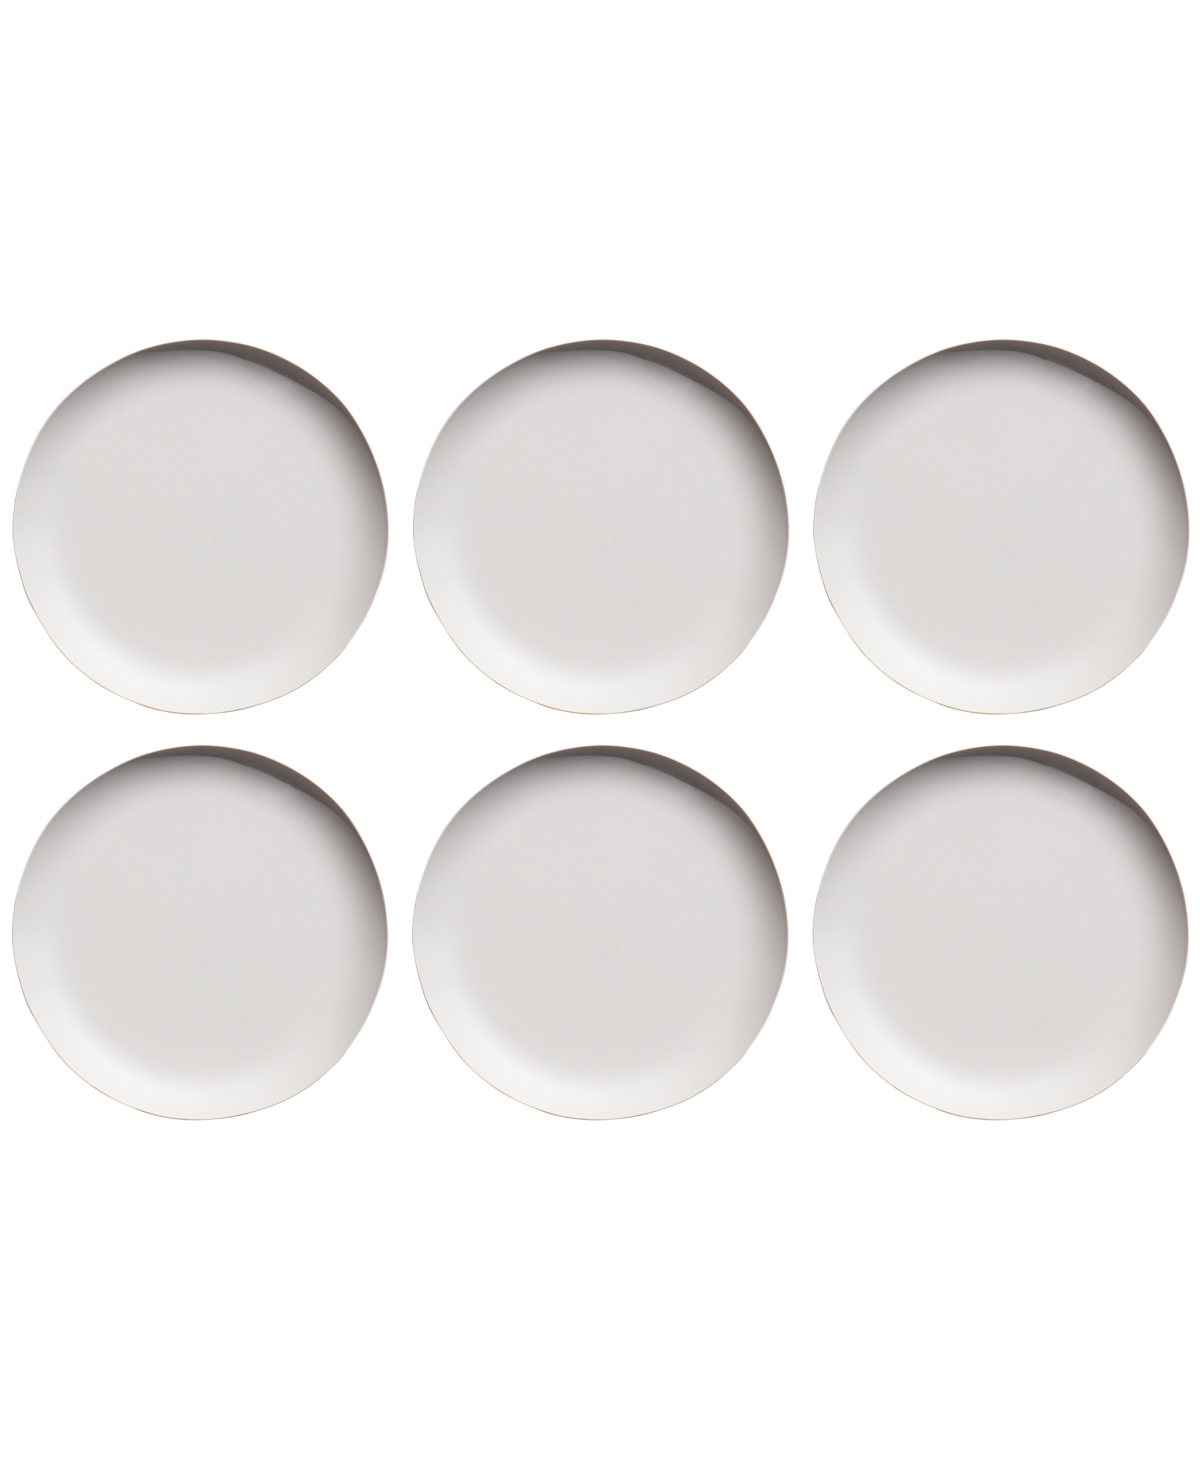 Natureone Craft Soft Matte Finish Coupe 8.5" Salad Plates, Set of 6, Service for 6 - White